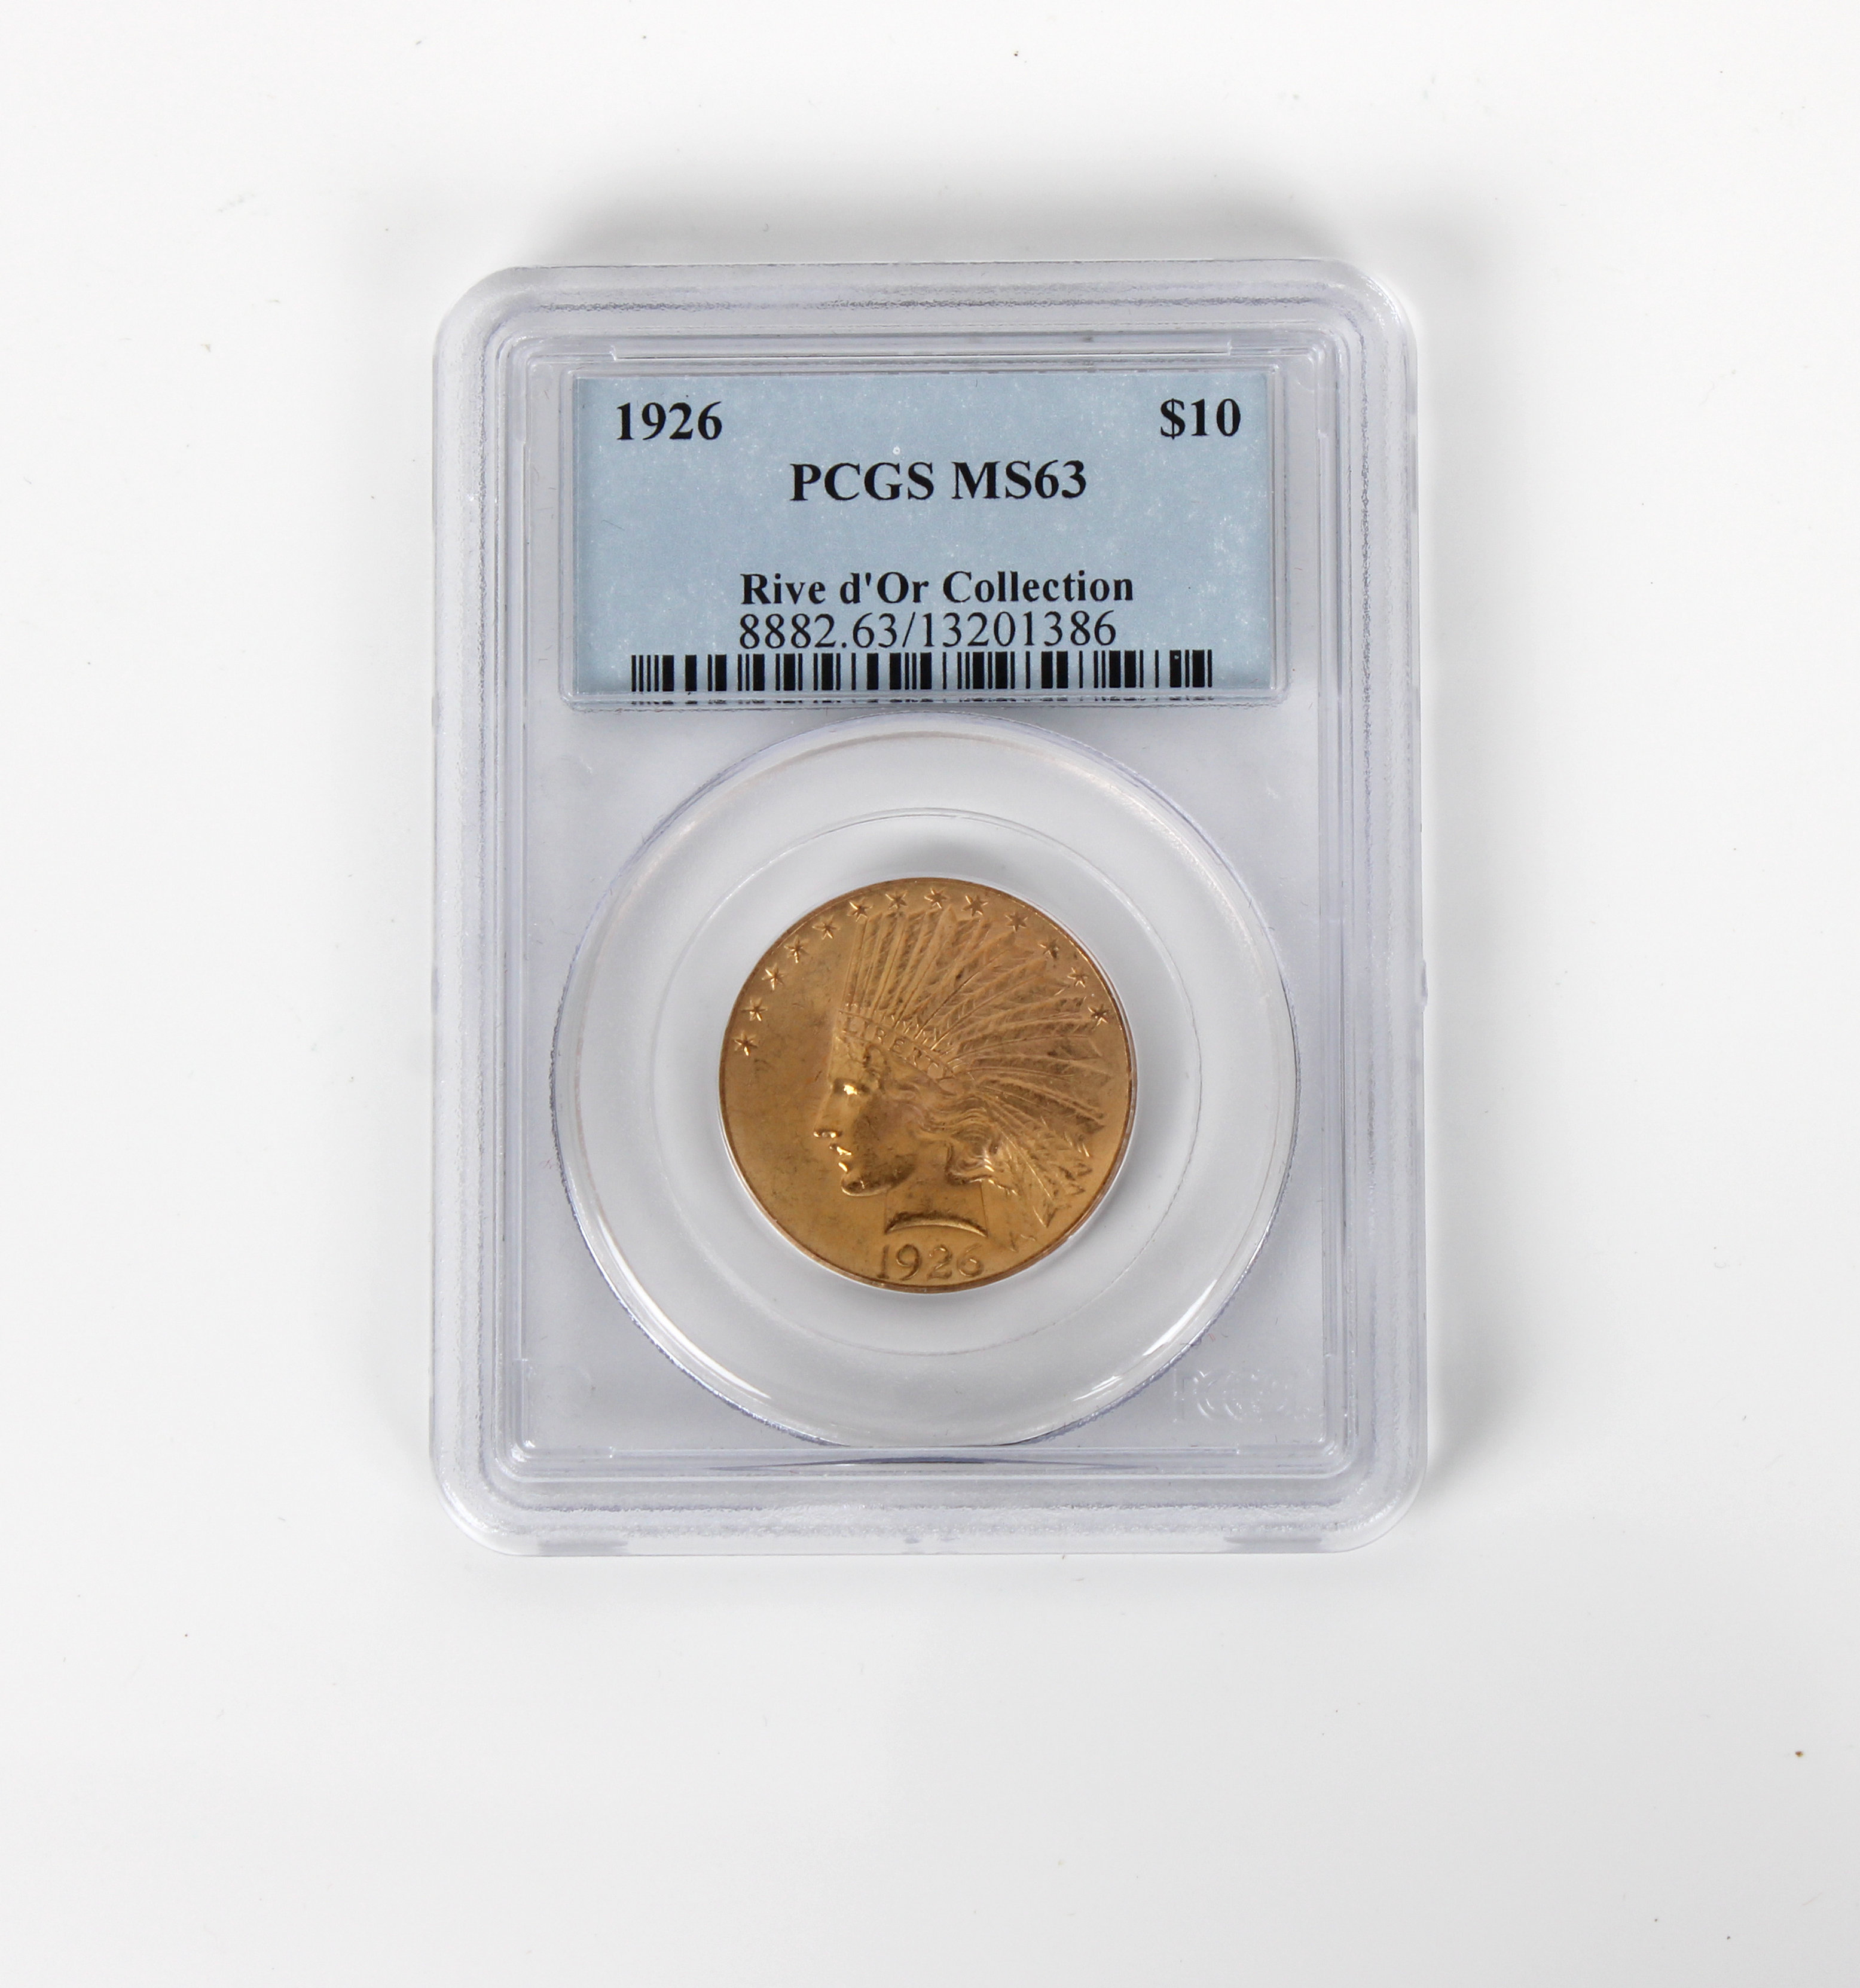 The United States of America 1926 Indian Head Eagle (Rive d'Or Collection) Ten Dollars ($10) Gold co